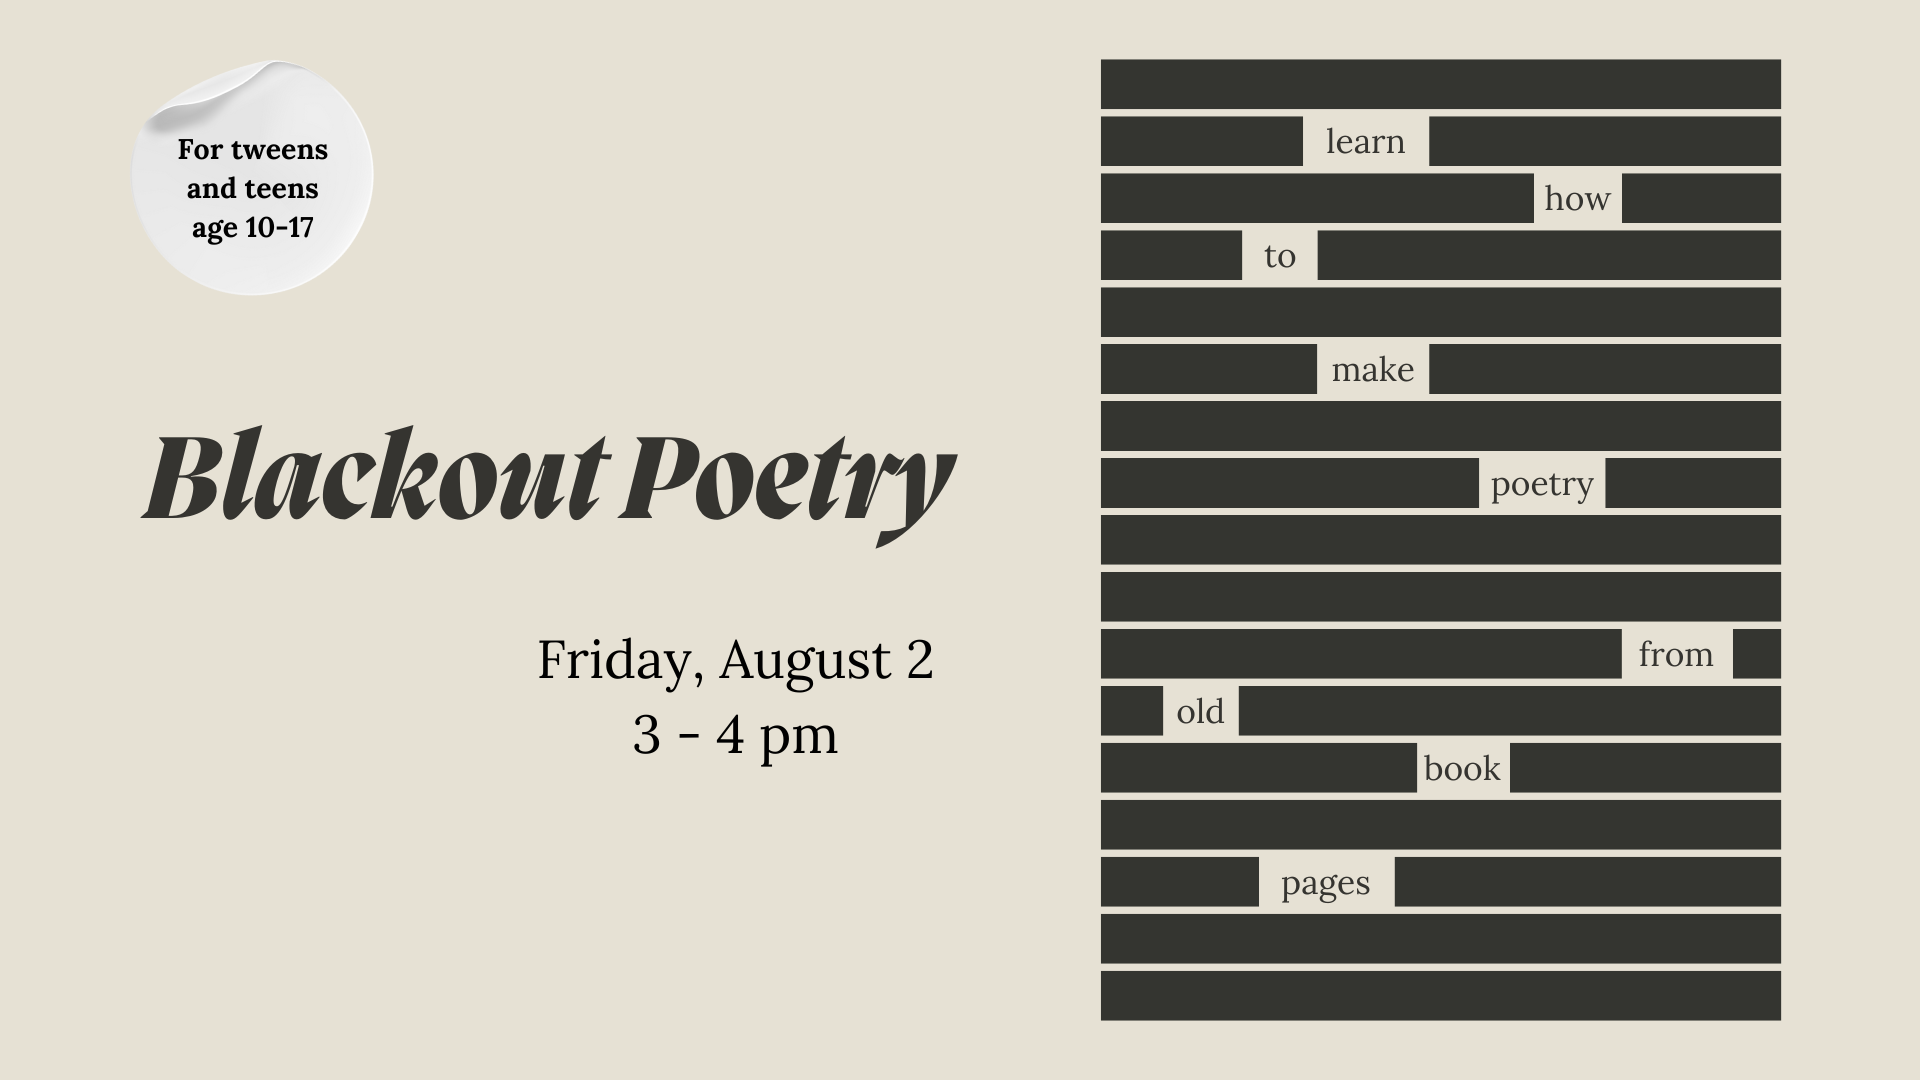 Blackout Poetry for Teens and Tweens, Friday, August 2, 3:00 pm